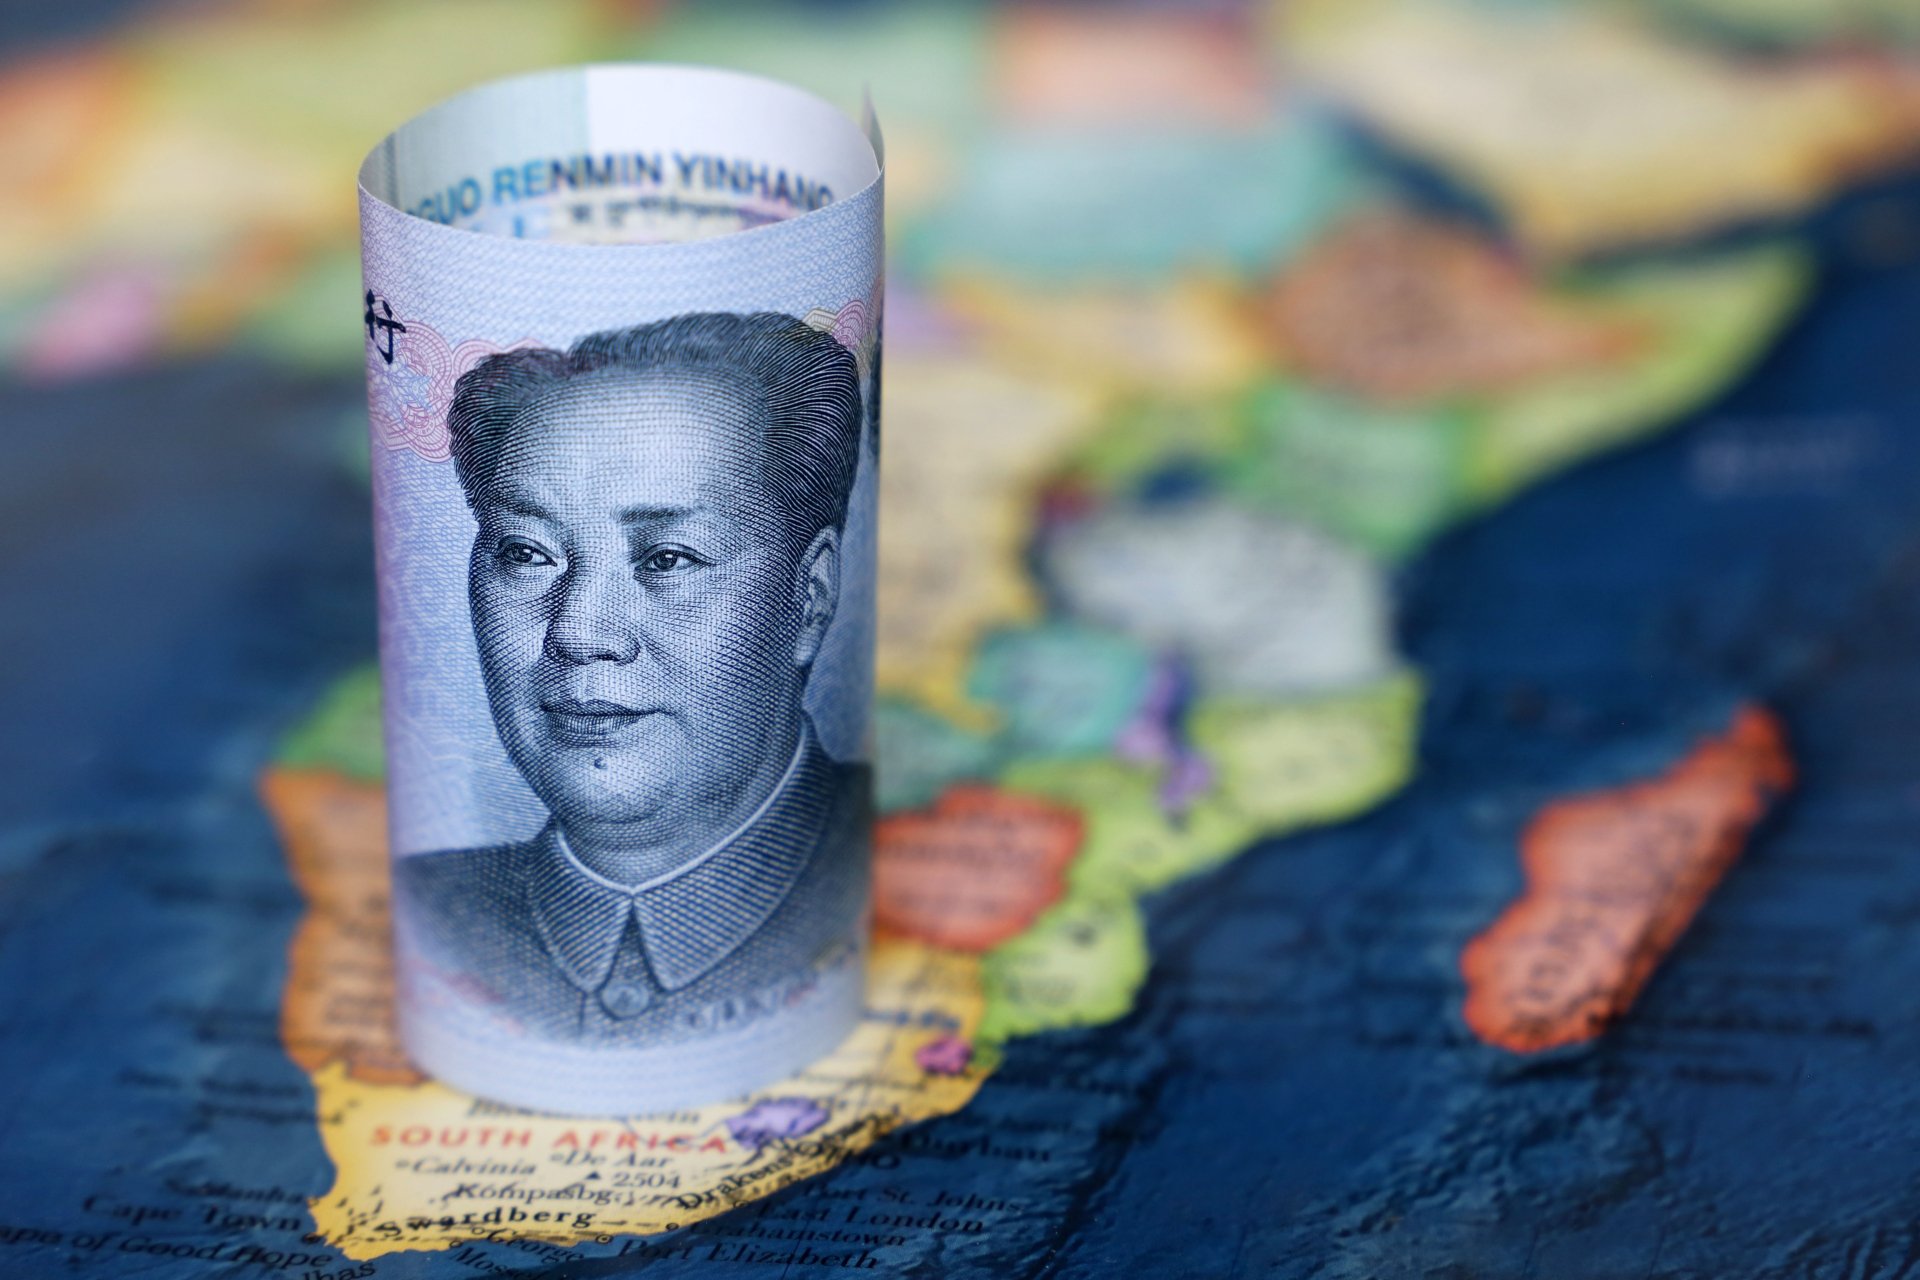 Mao on Currency